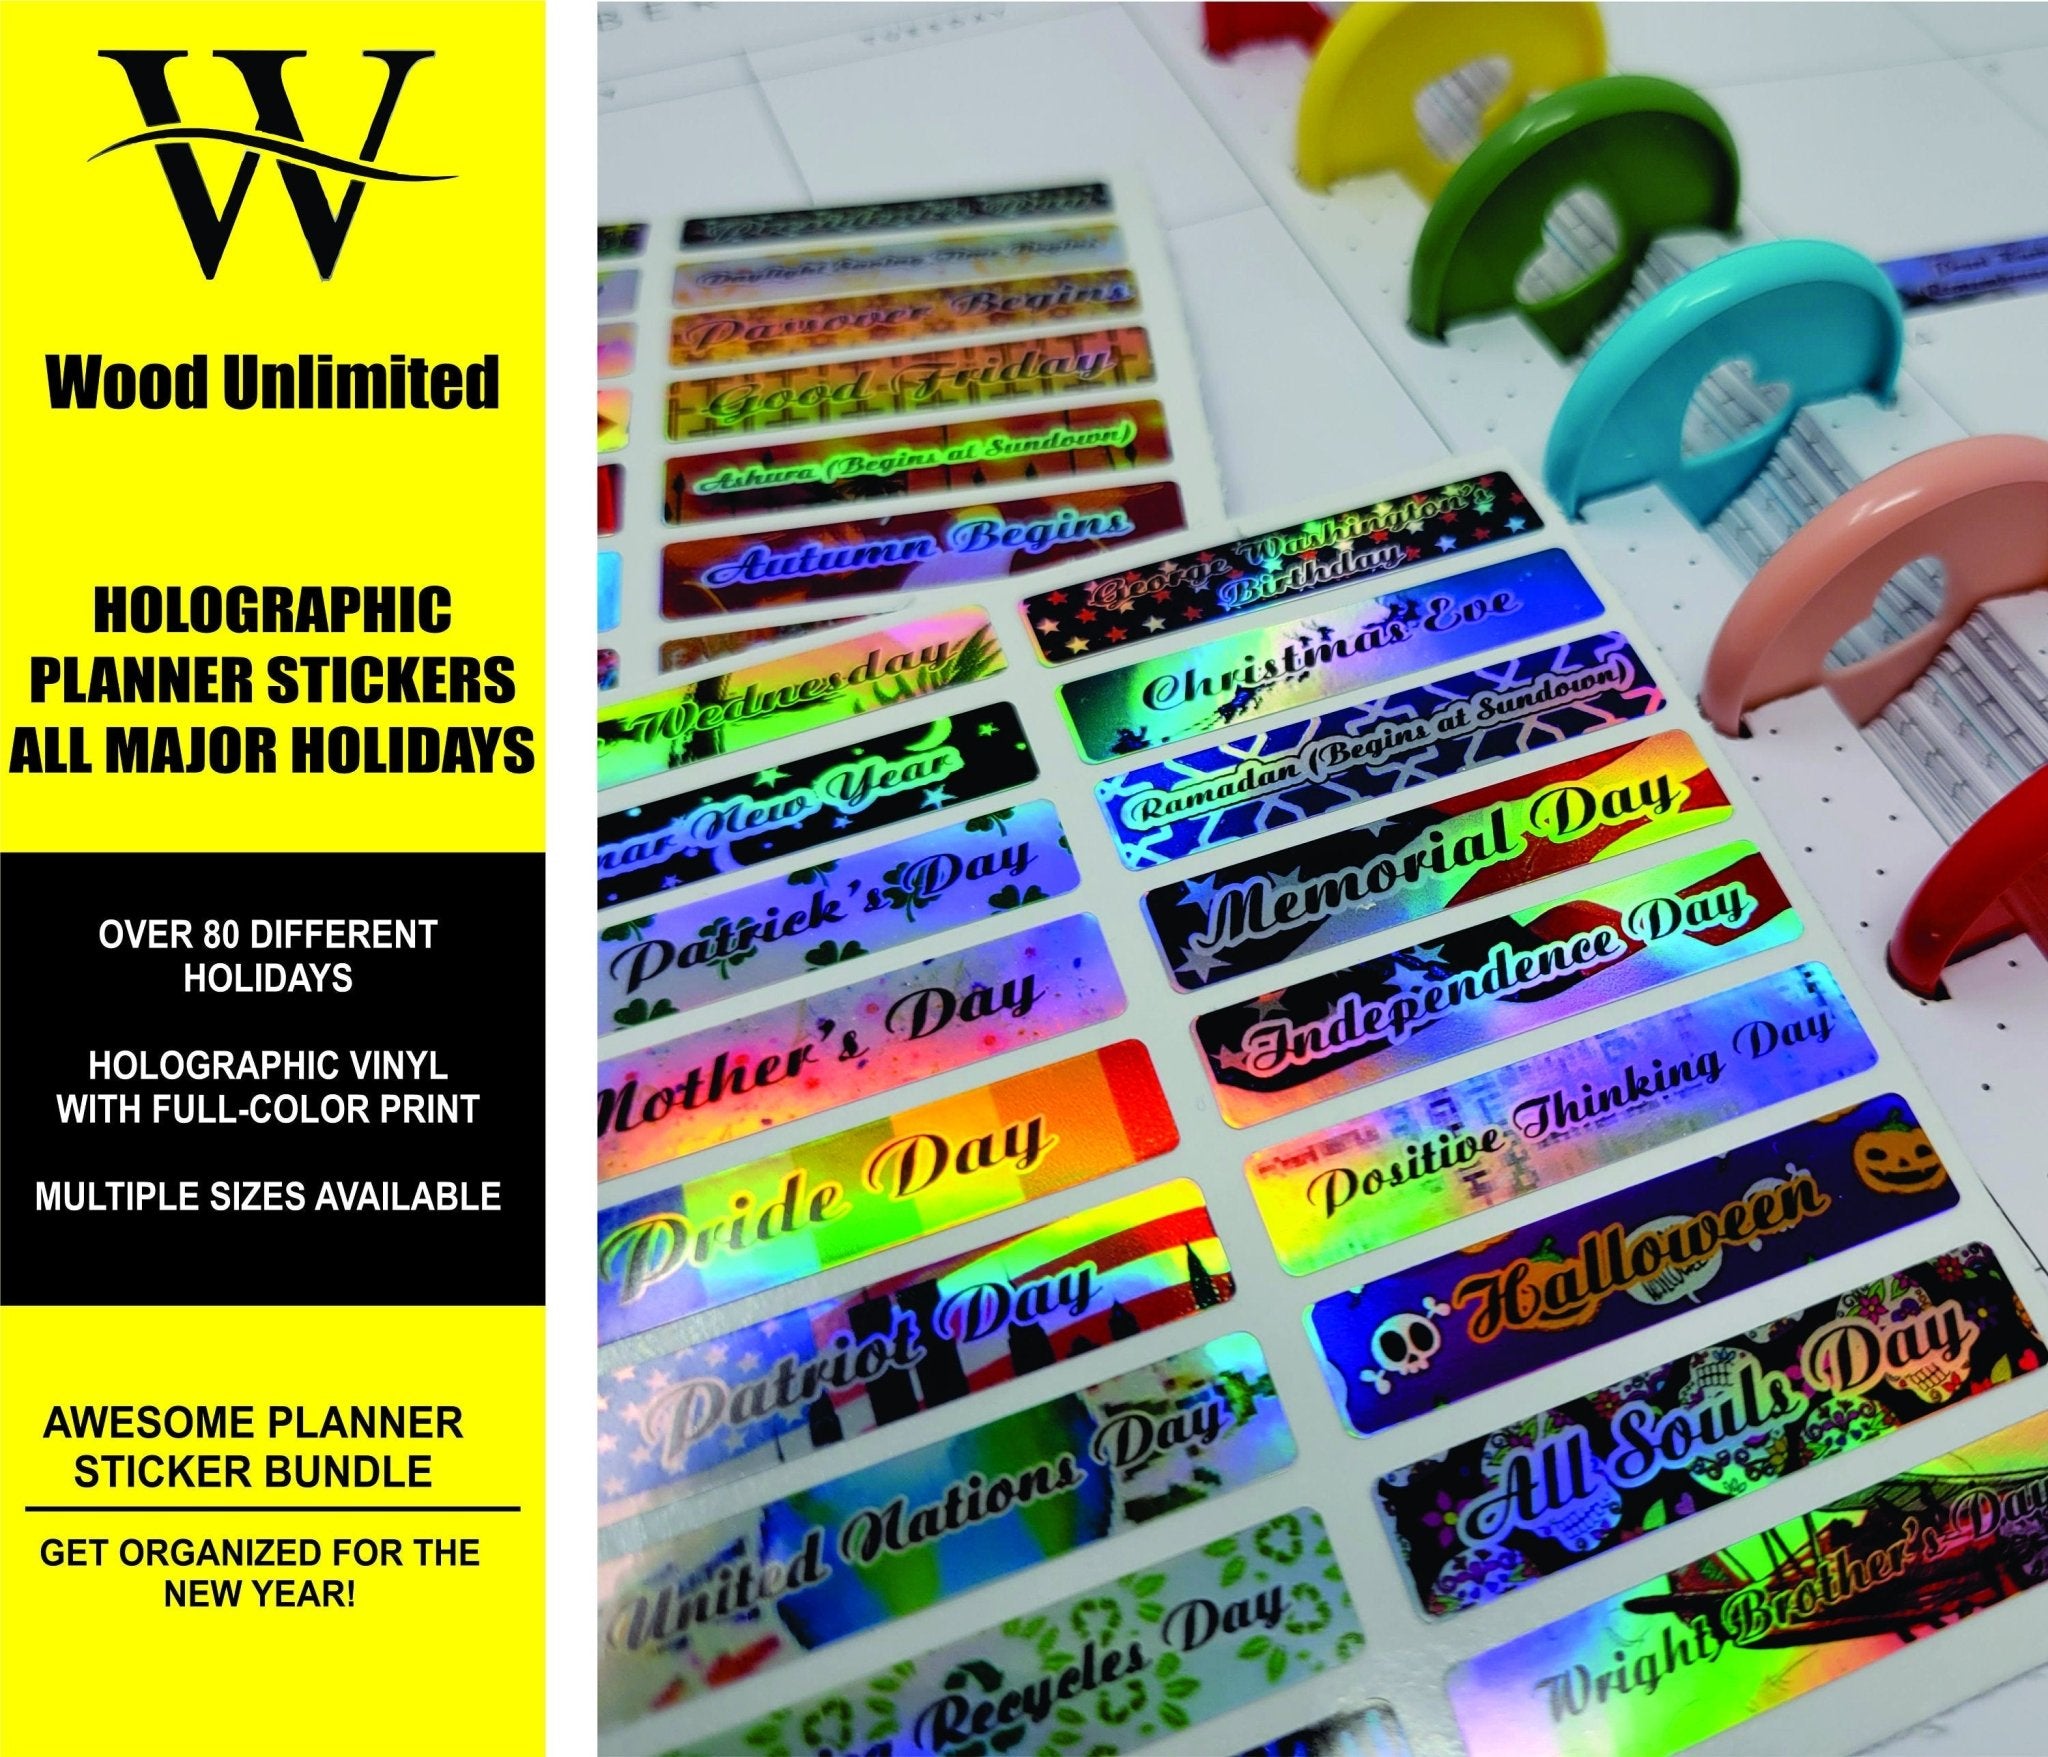 Holographic, Full Color, Planner Stickers, Holographic Sheet Stickers For  Planners, Full Color, Waterproof, 80 Major Holidays! - Wood Unlimited